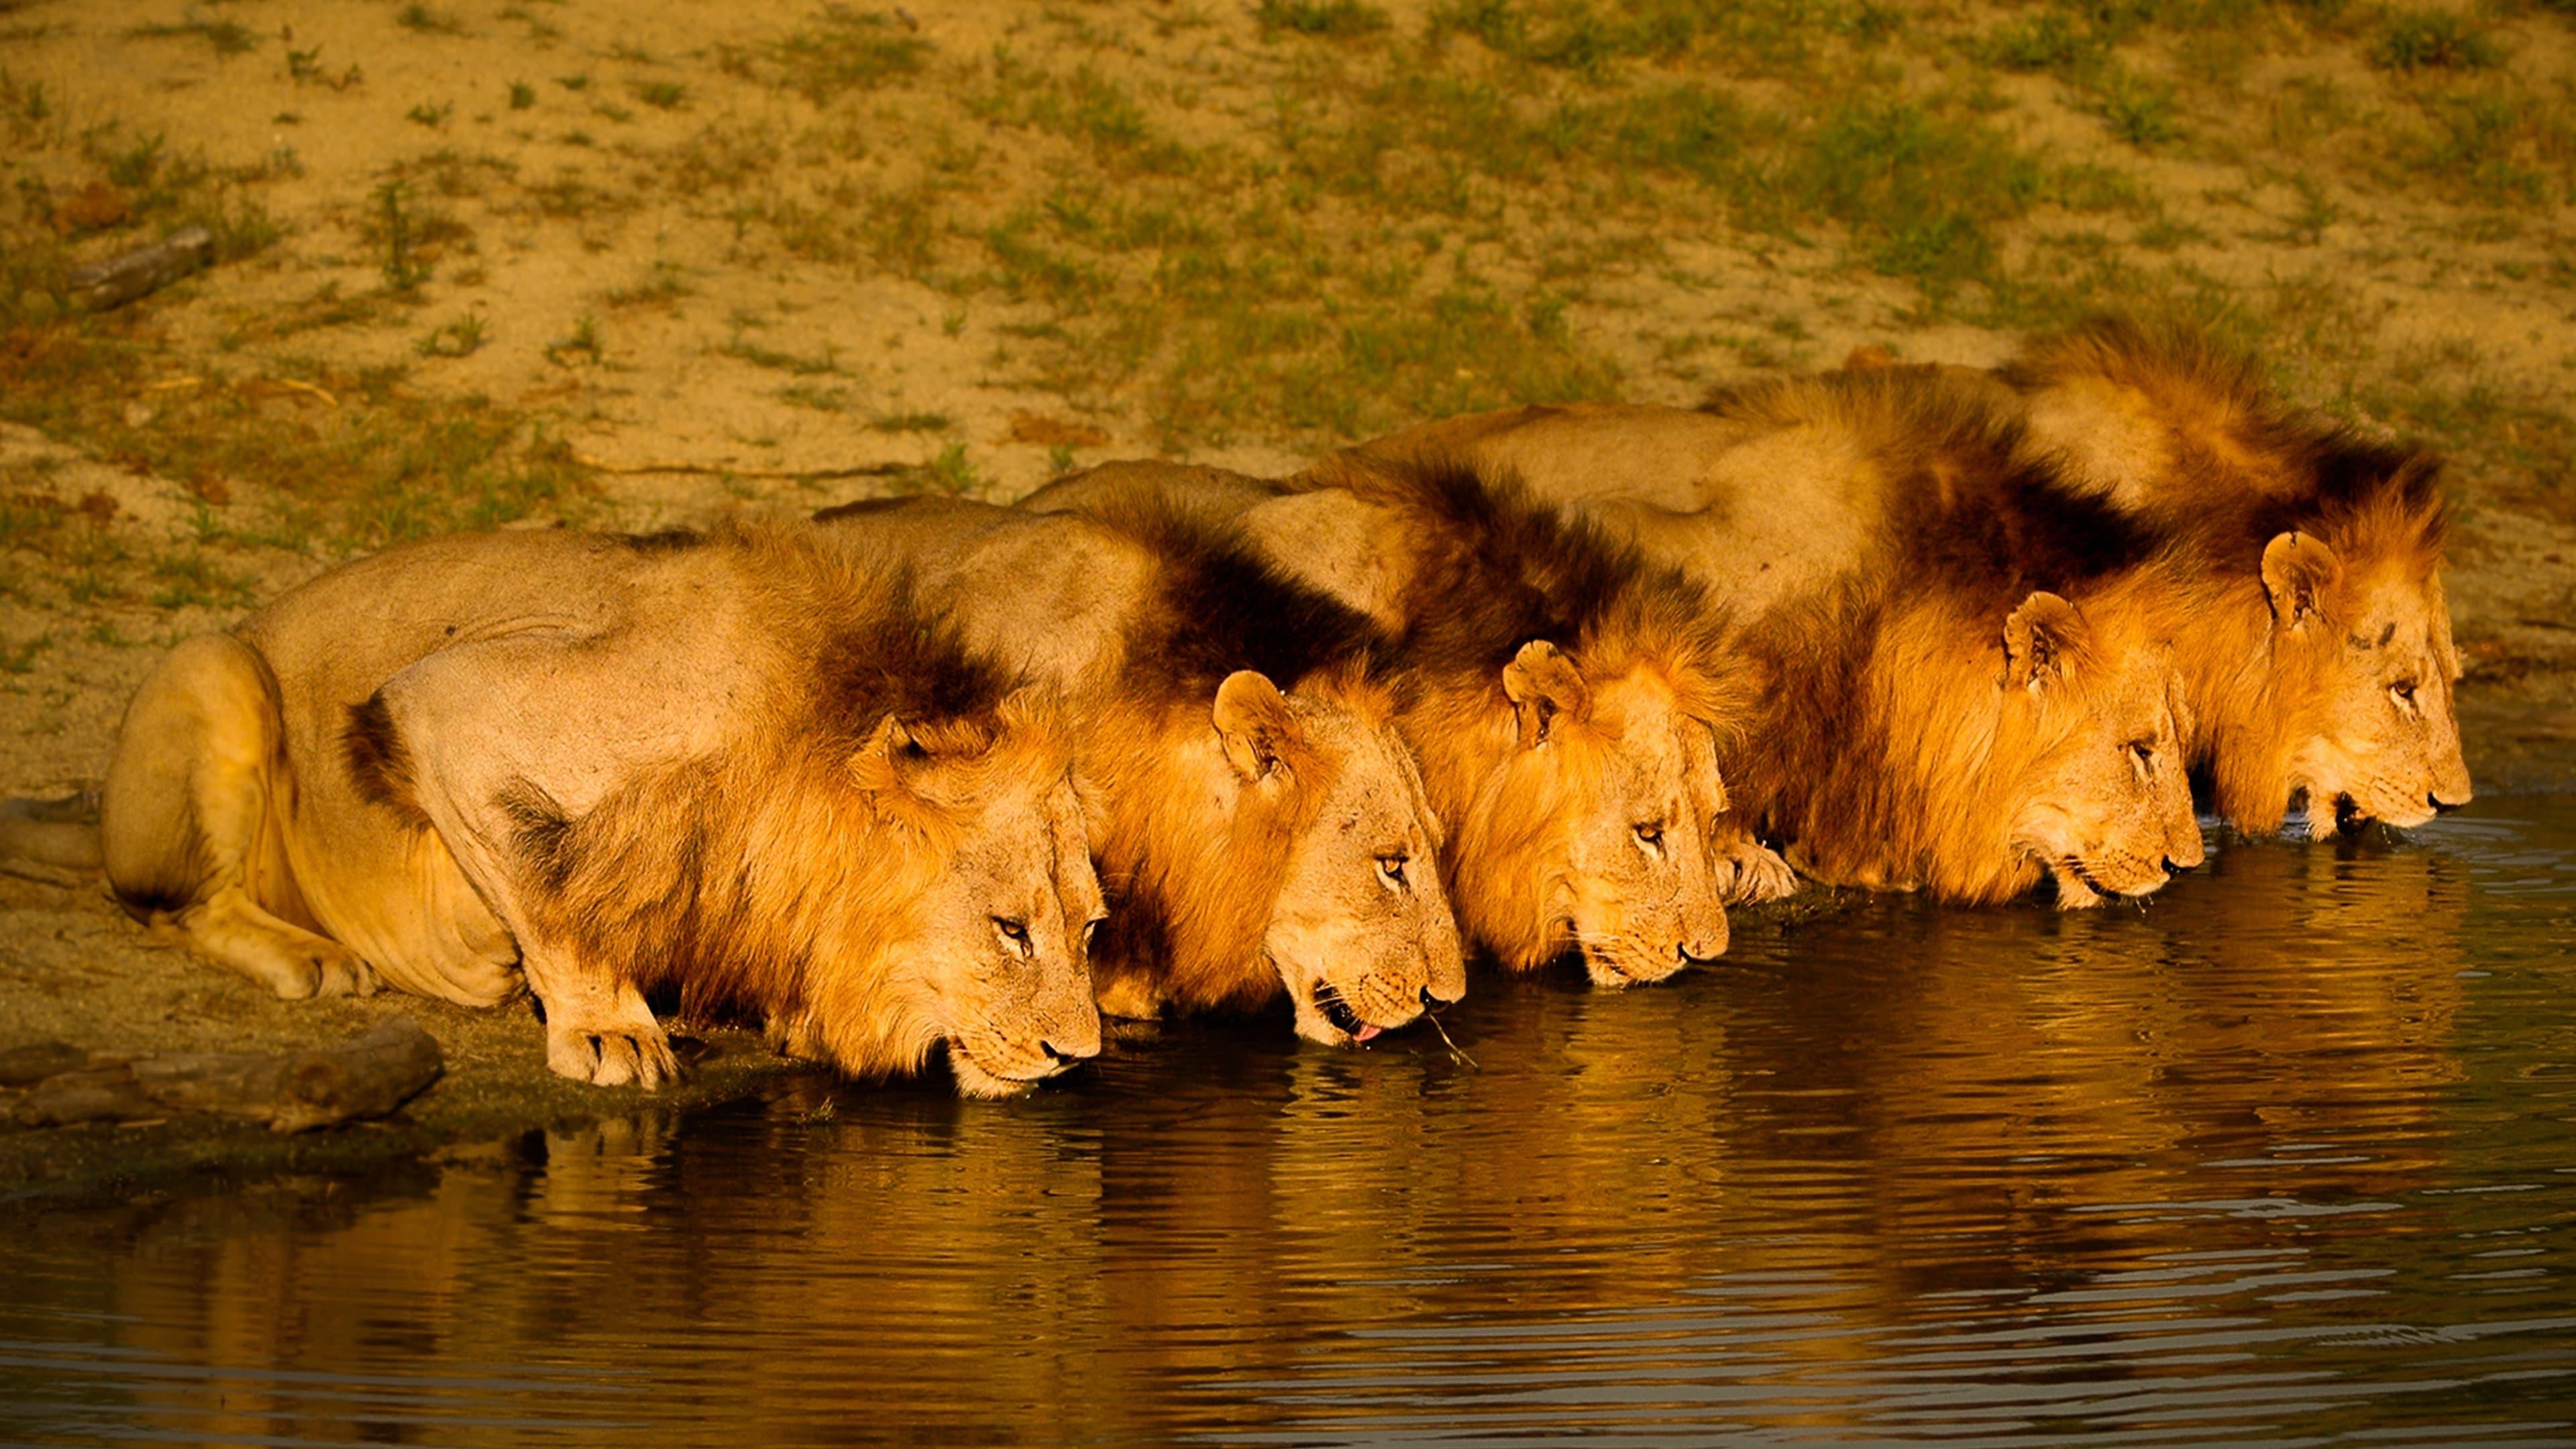 Brothers in Blood: The Lions of Sabi Sand backdrop